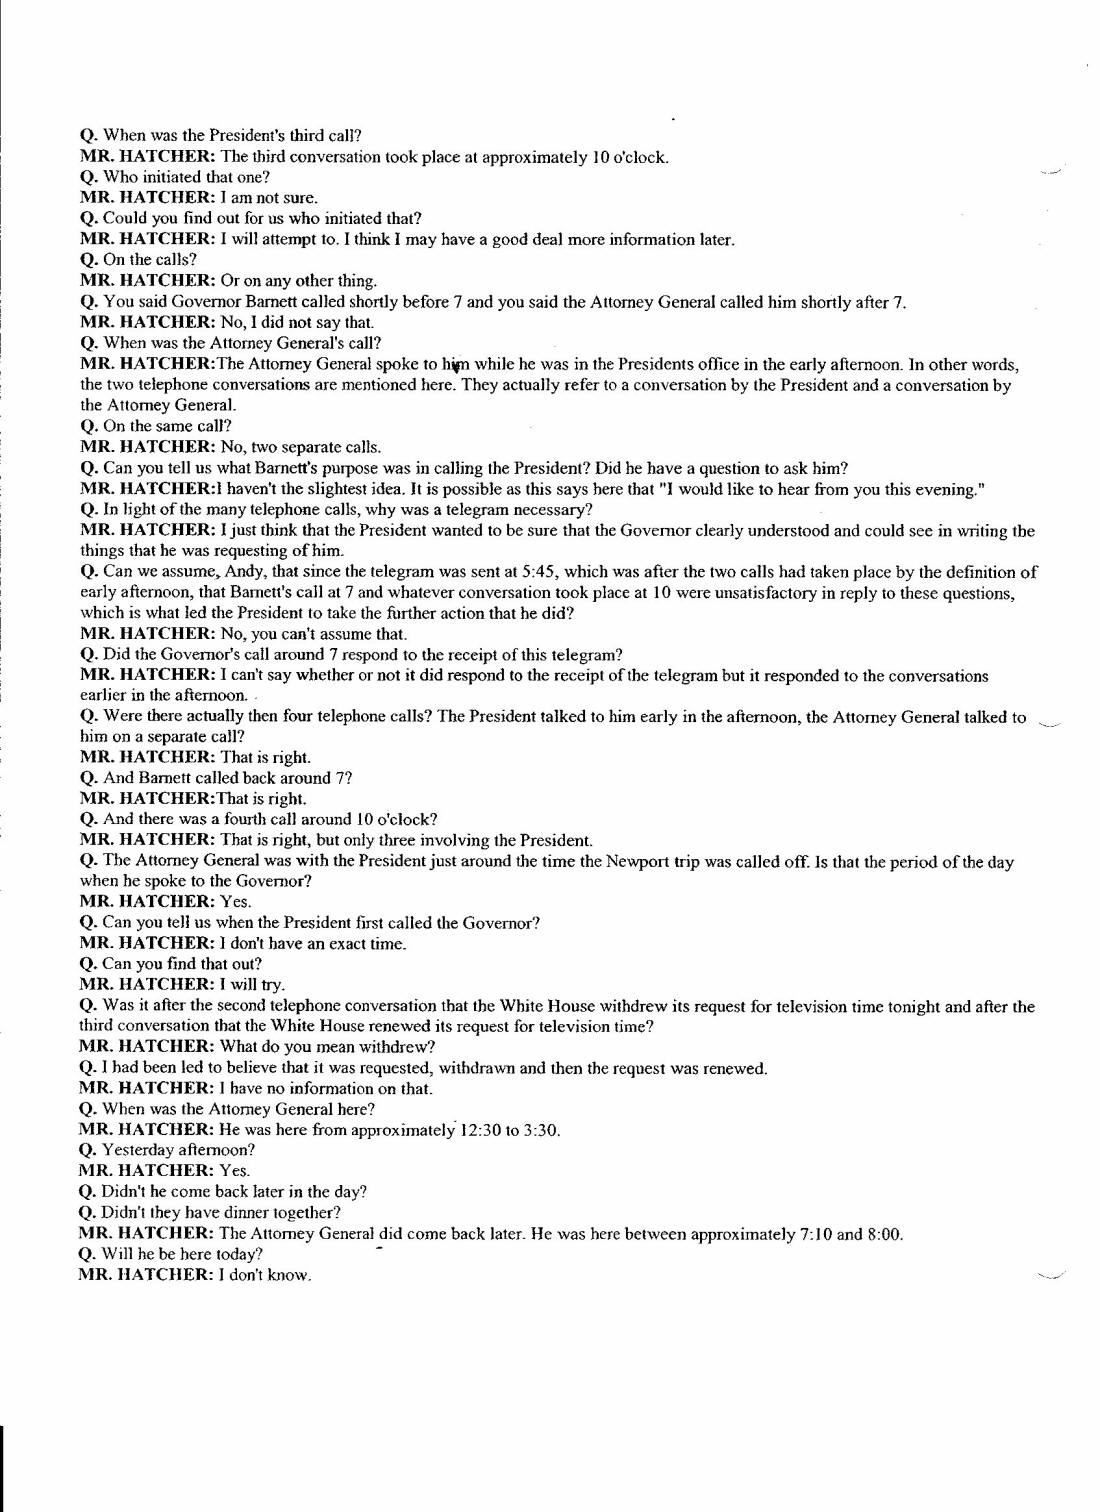 Transcript of News Conference page 2